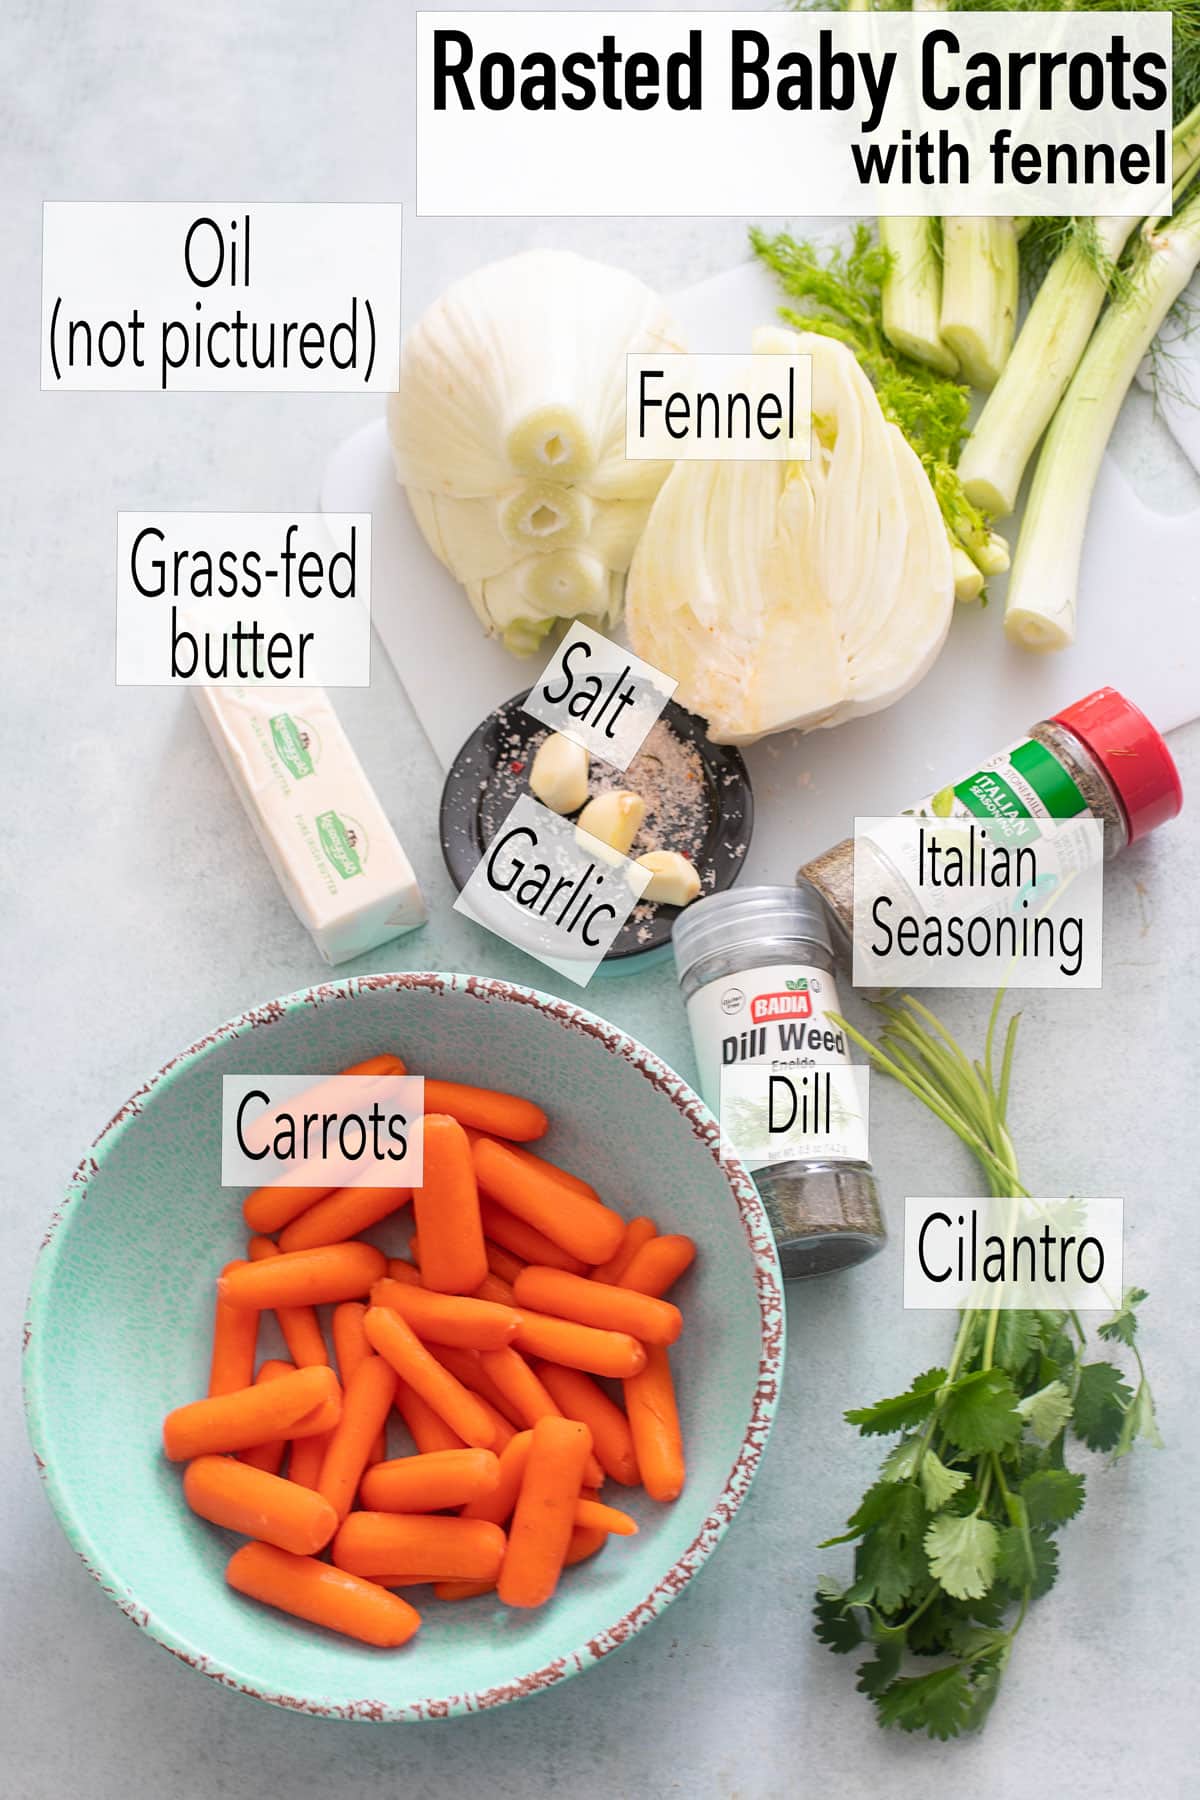 Top view of ingredients needed to make roasted baby carrots with fennel